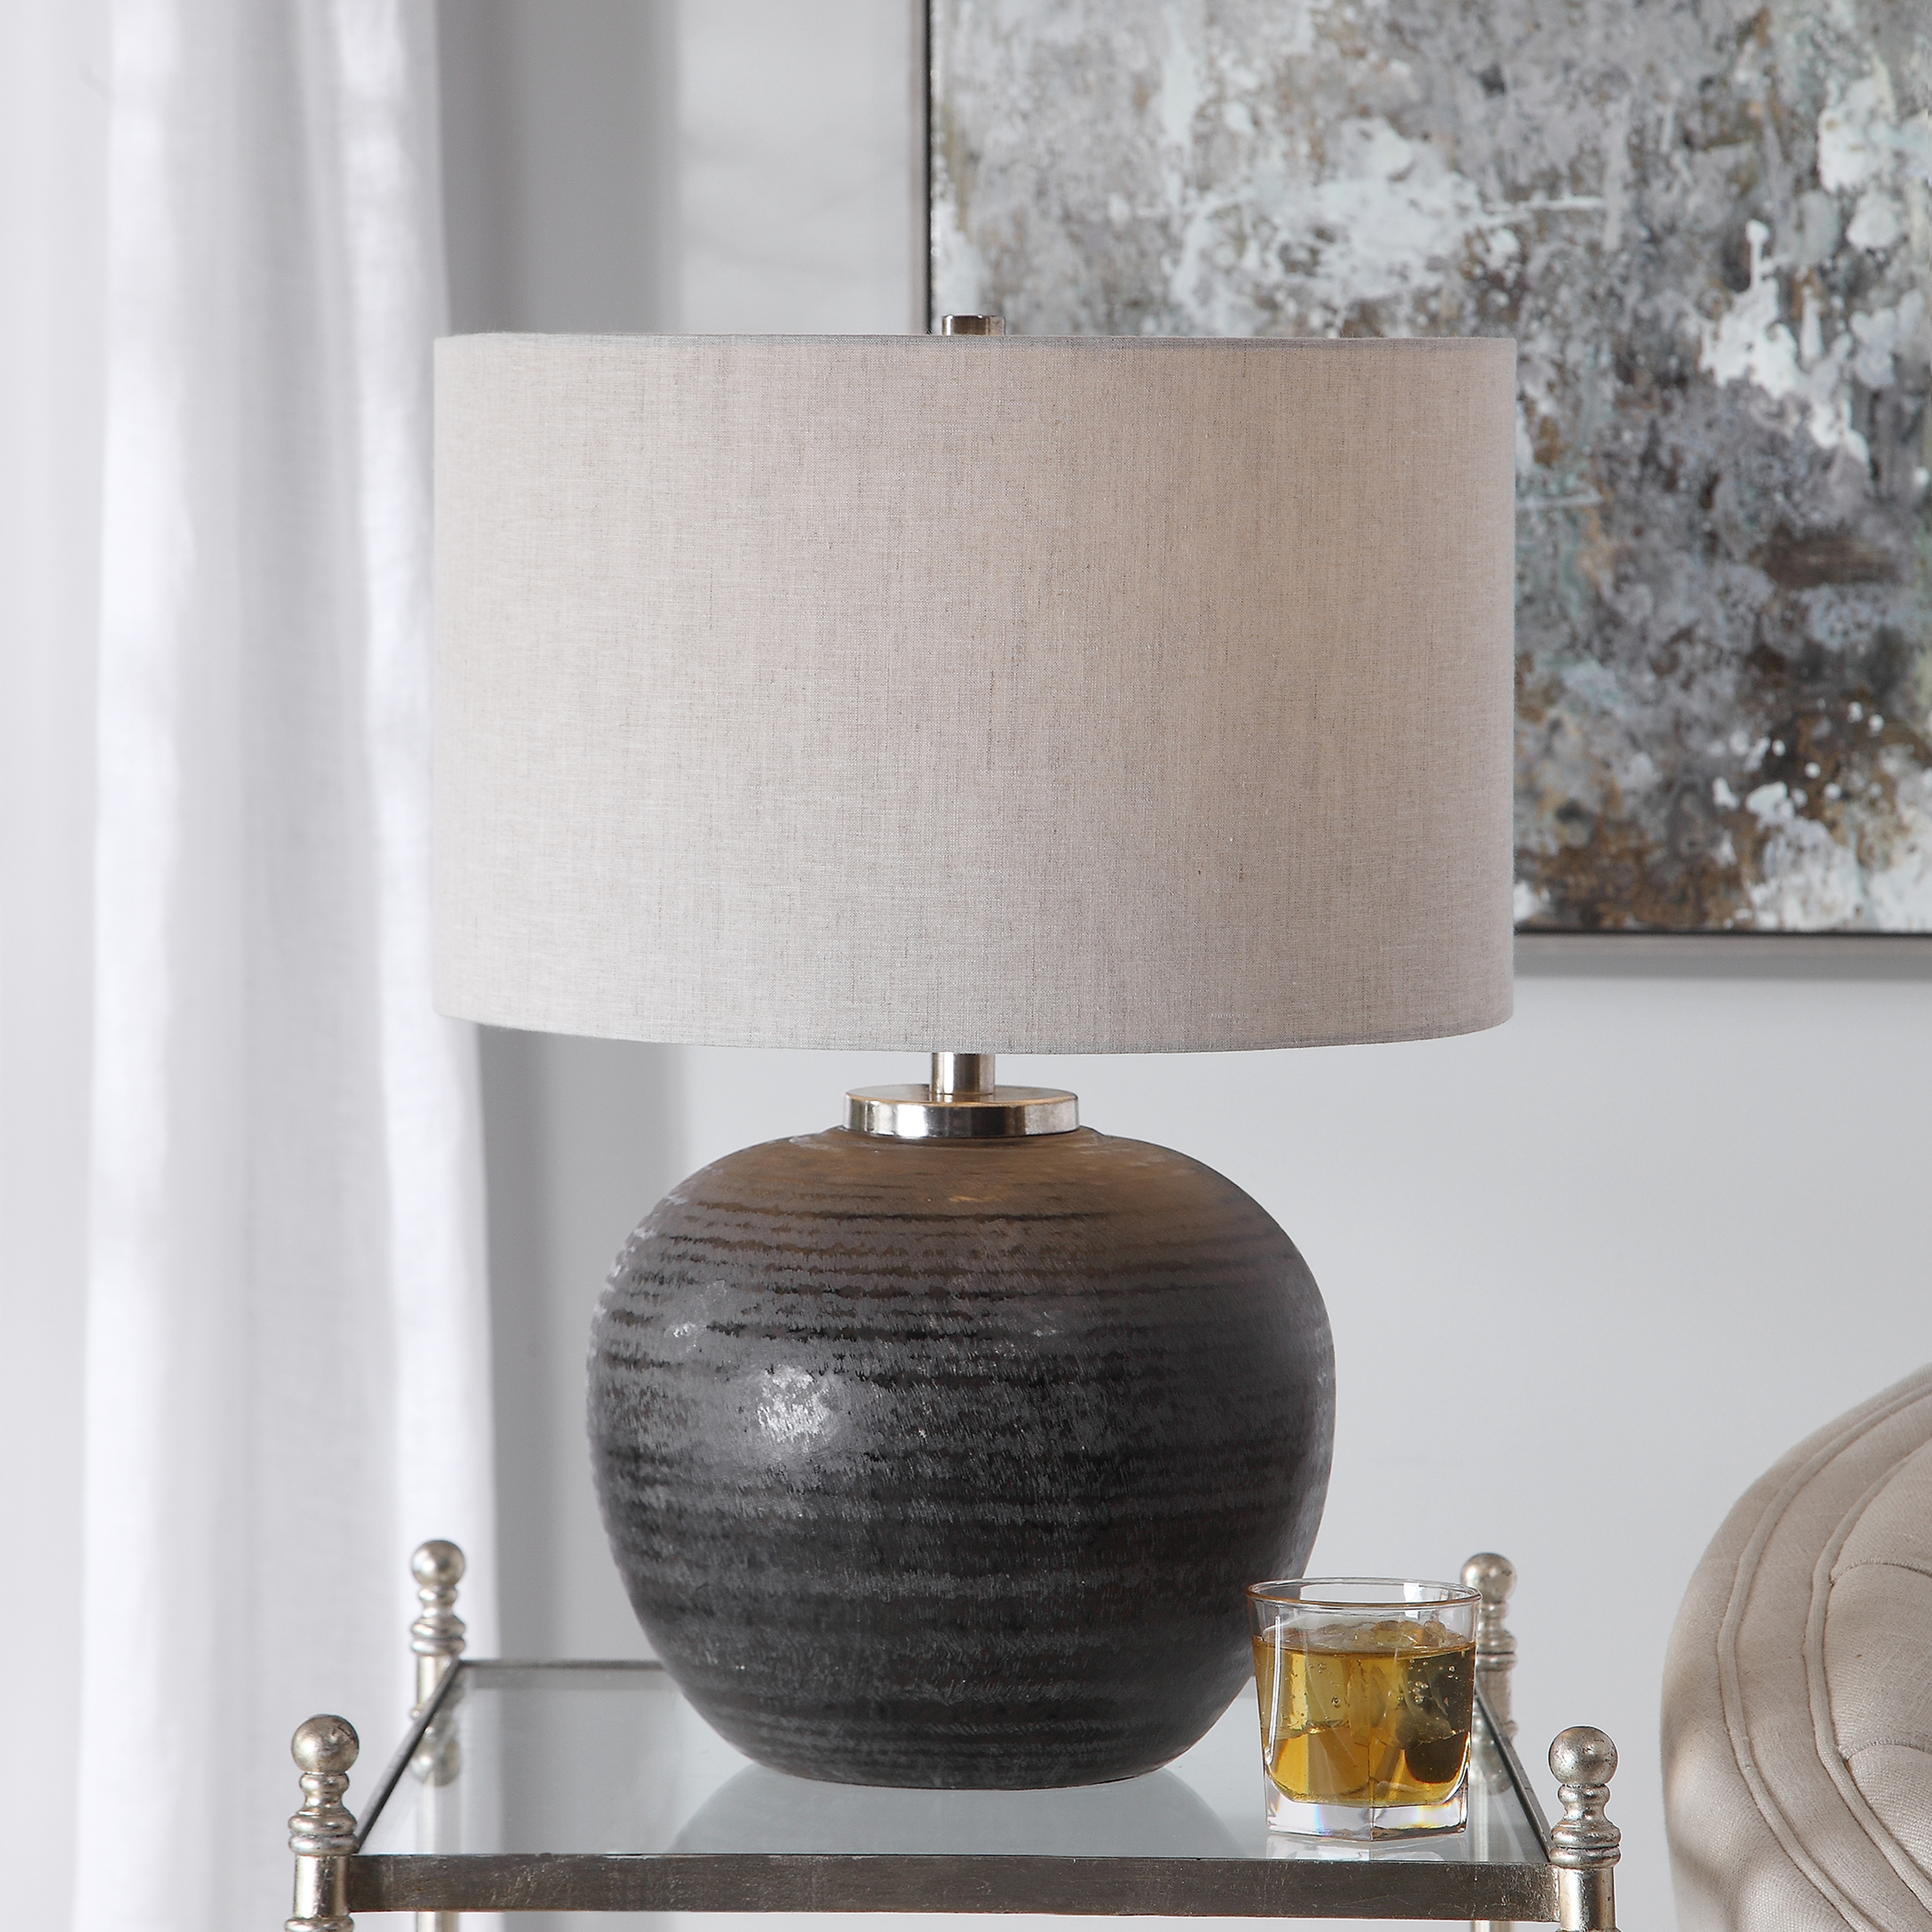 Mikkel Charcoal Table Lamp- AVAIL: AUG 13, 2021 - Hudsonhill Foundry